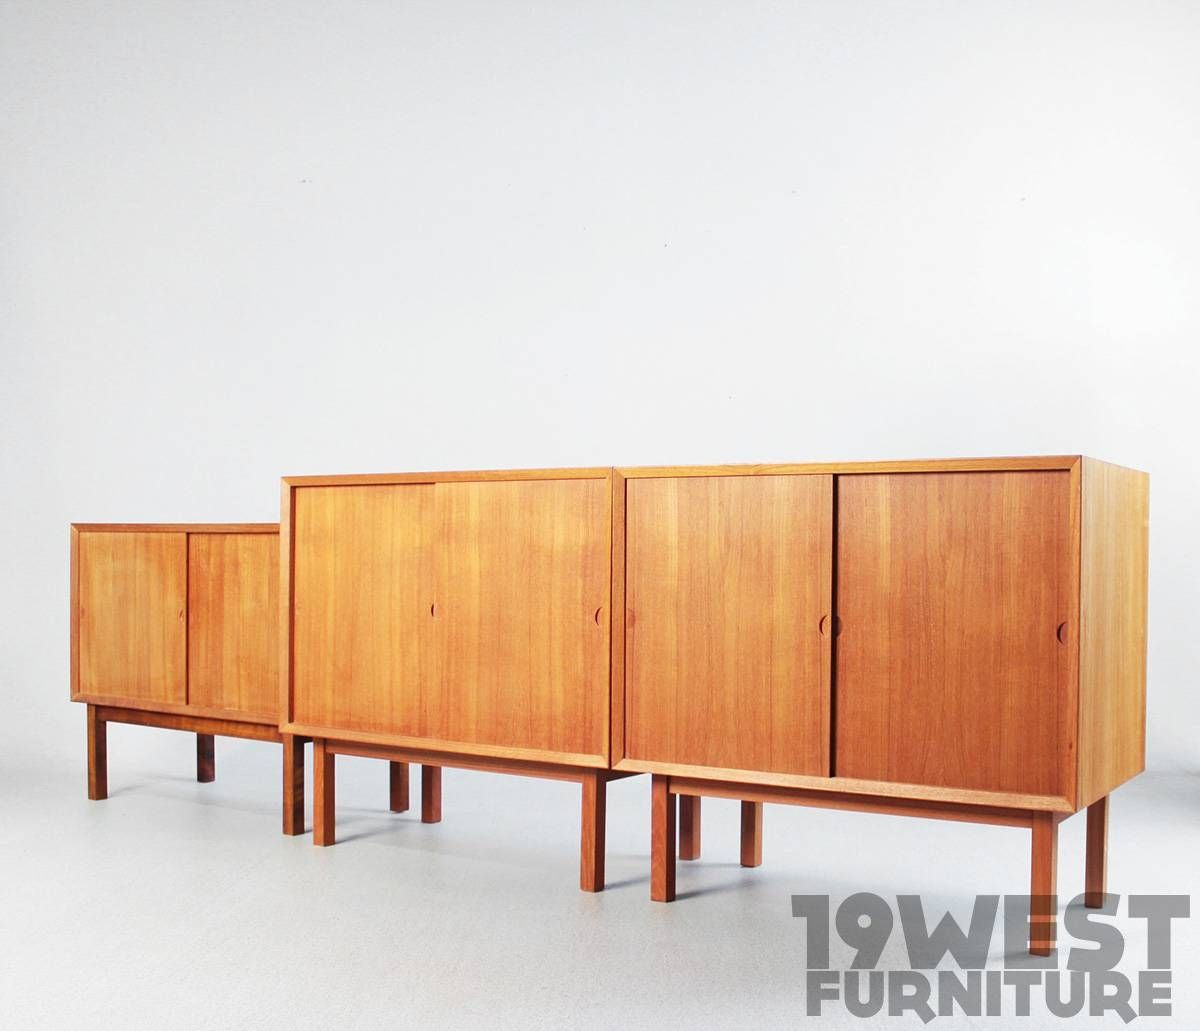 Kleine Sideboards, Poul Cadovius | 19 West For 2018 Kleine Sideboards (View 5 of 15)